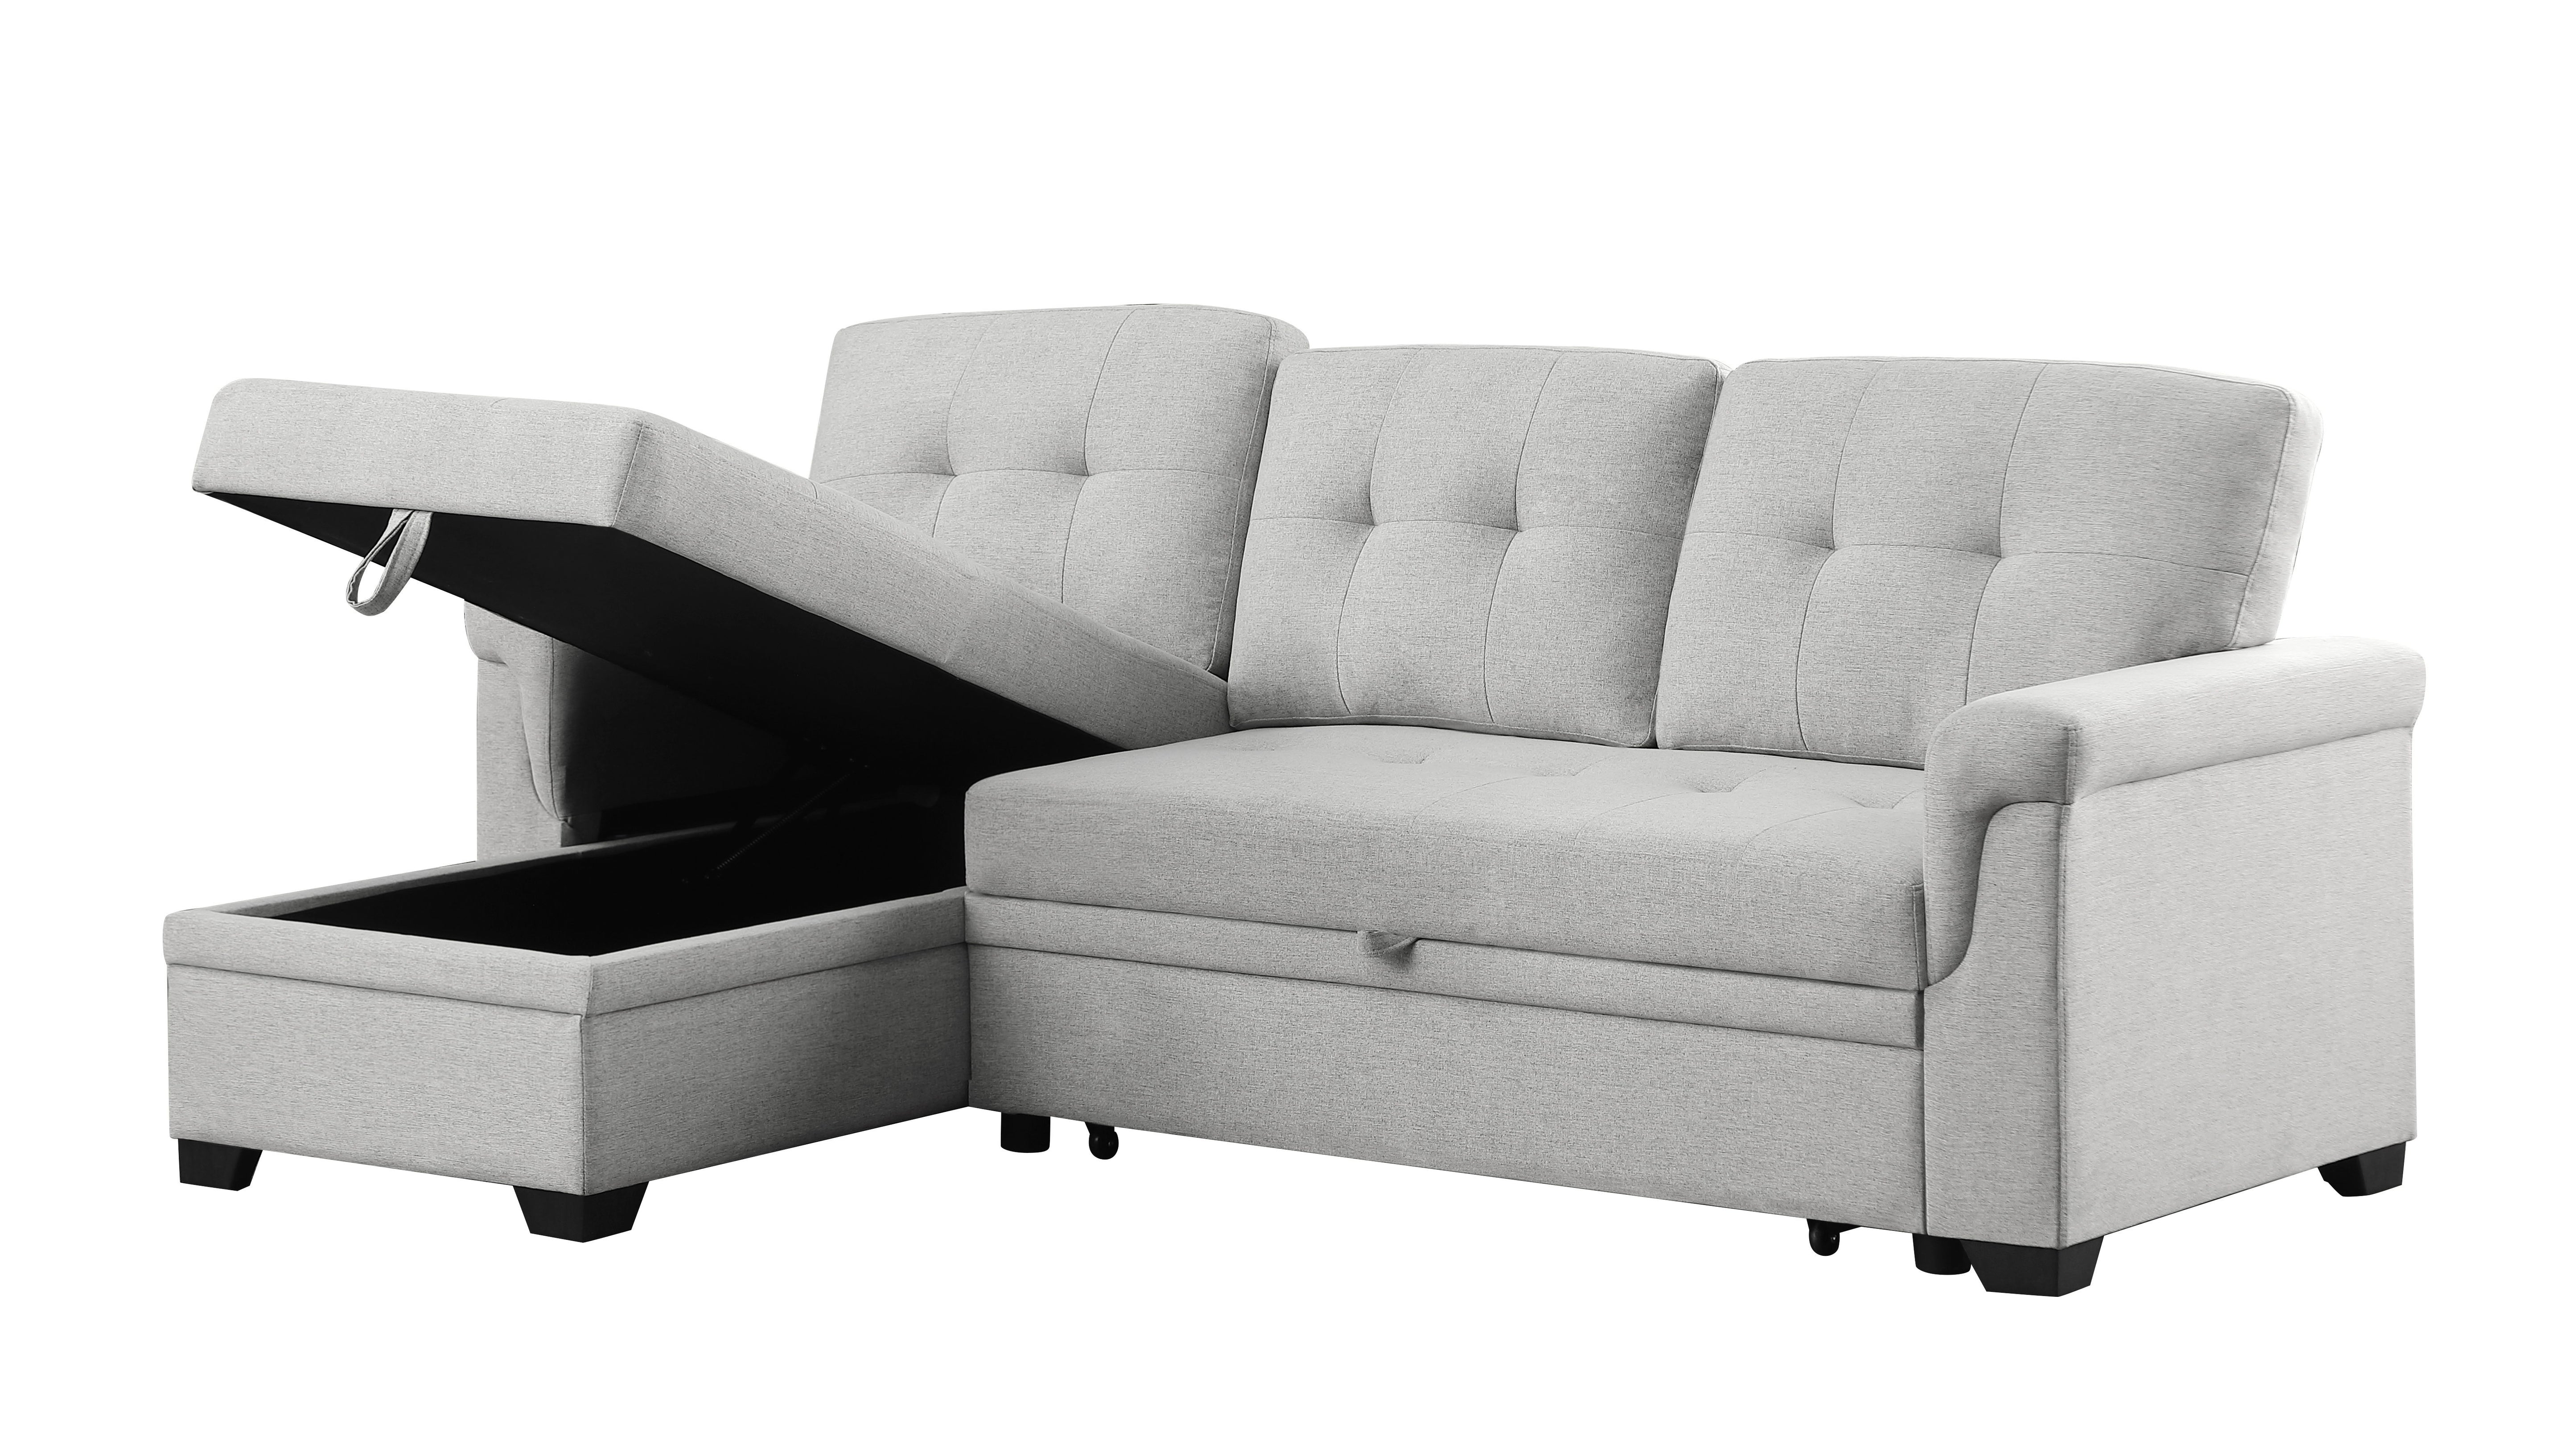 Destiny - Linen Reversible Sleeper Sectional Sofa With Storage Chaise